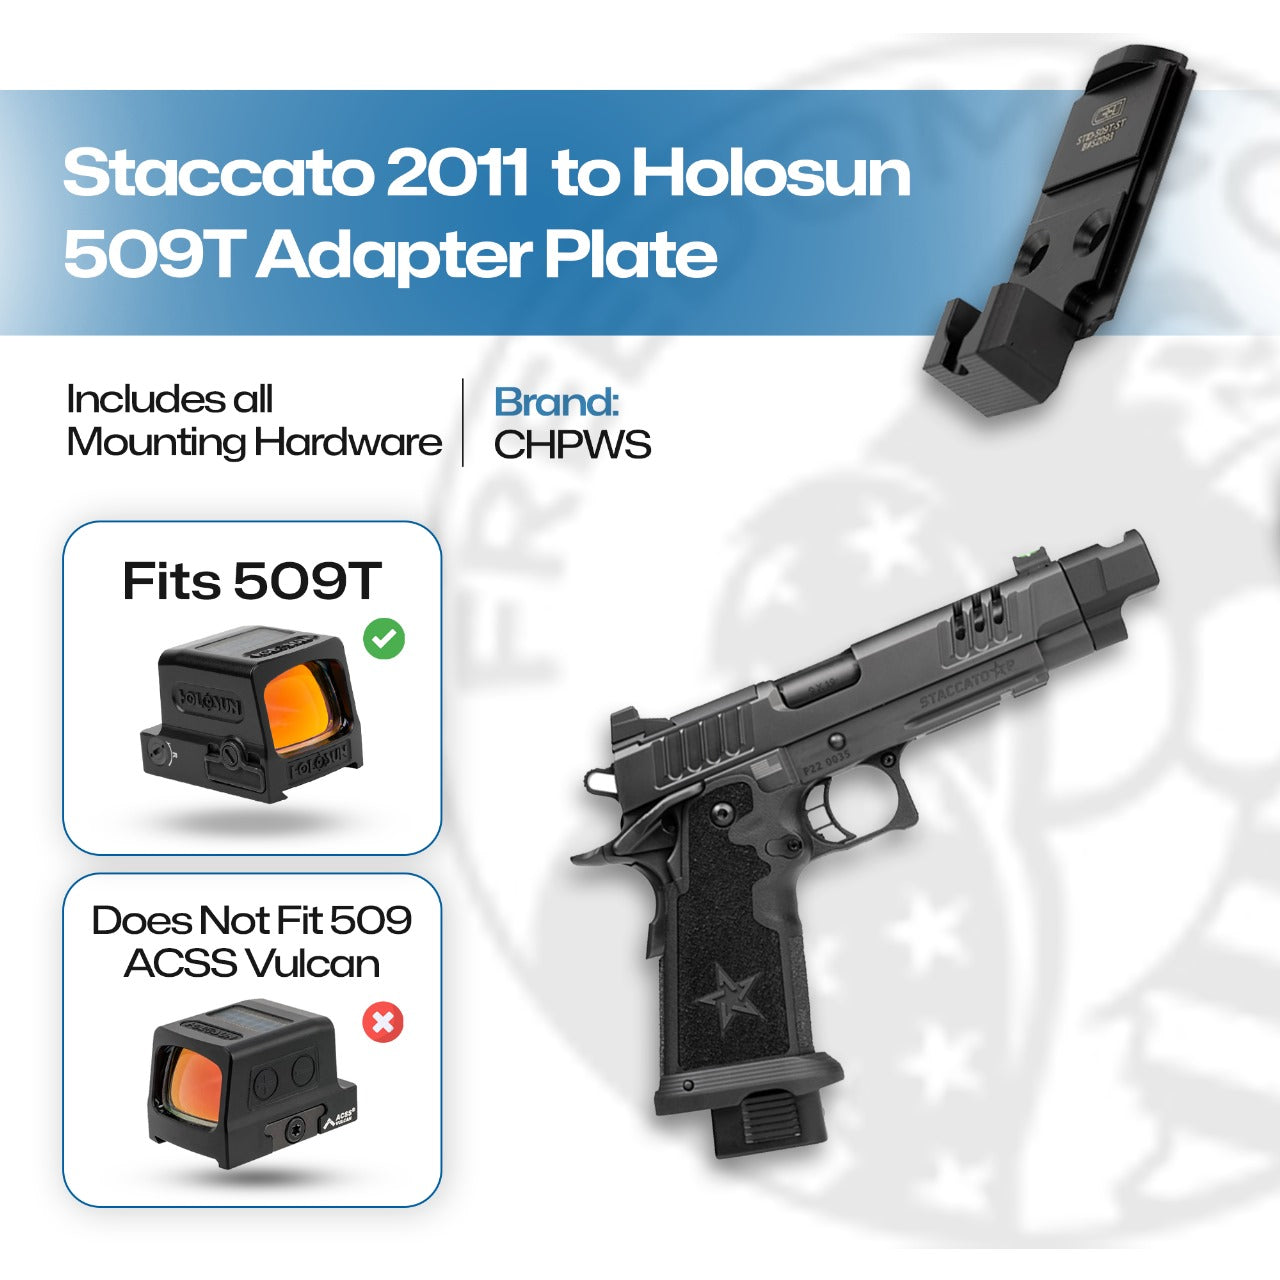 Staccato 2011 to Holoson 509T Adapter Plate - CHPWS